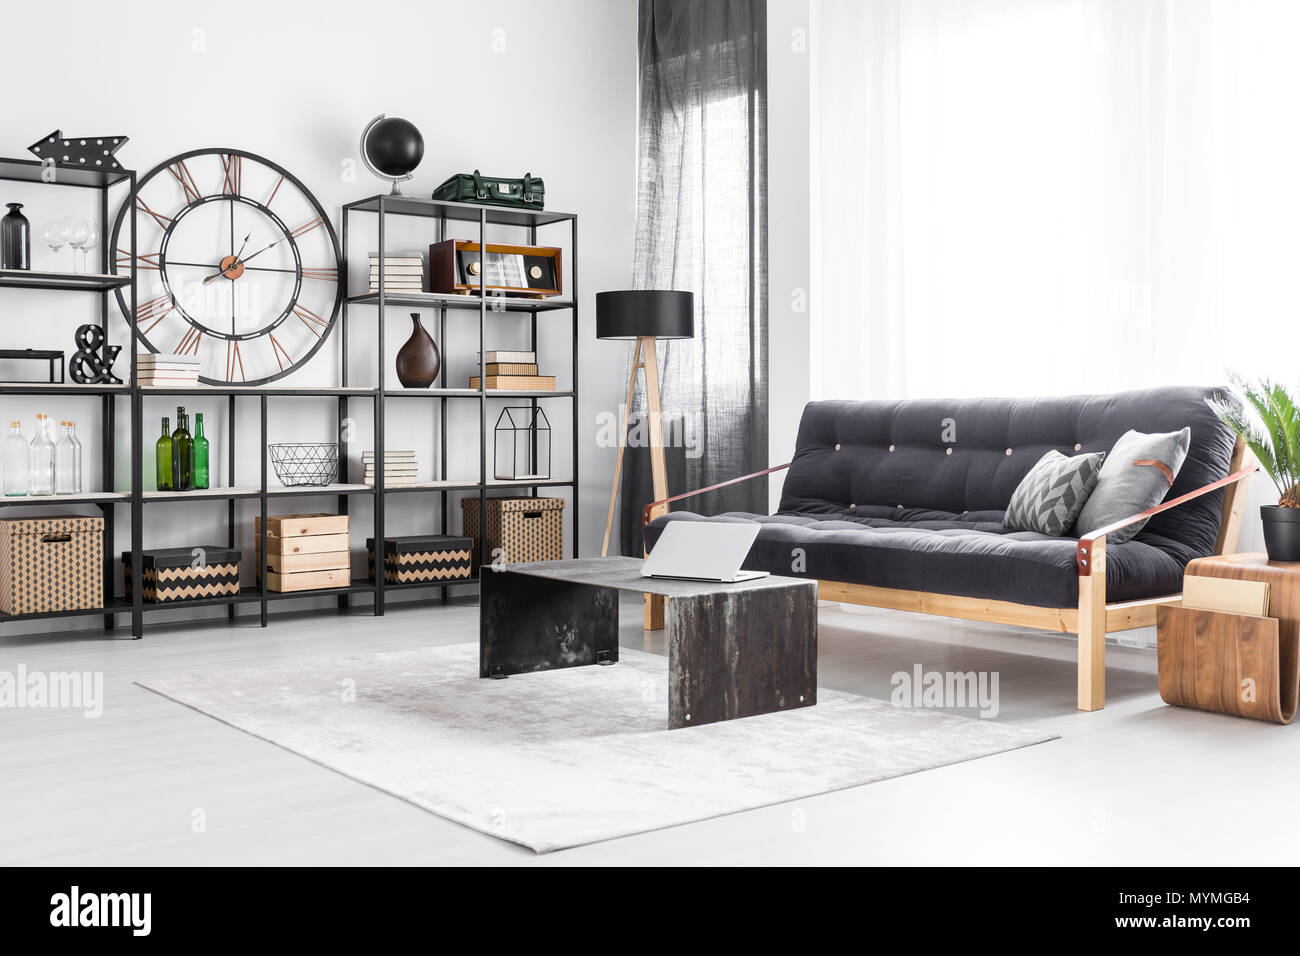 Laptop on table and wooden sofa in bright living room interior with industrial clock and bottles on a shelf Stock Photo